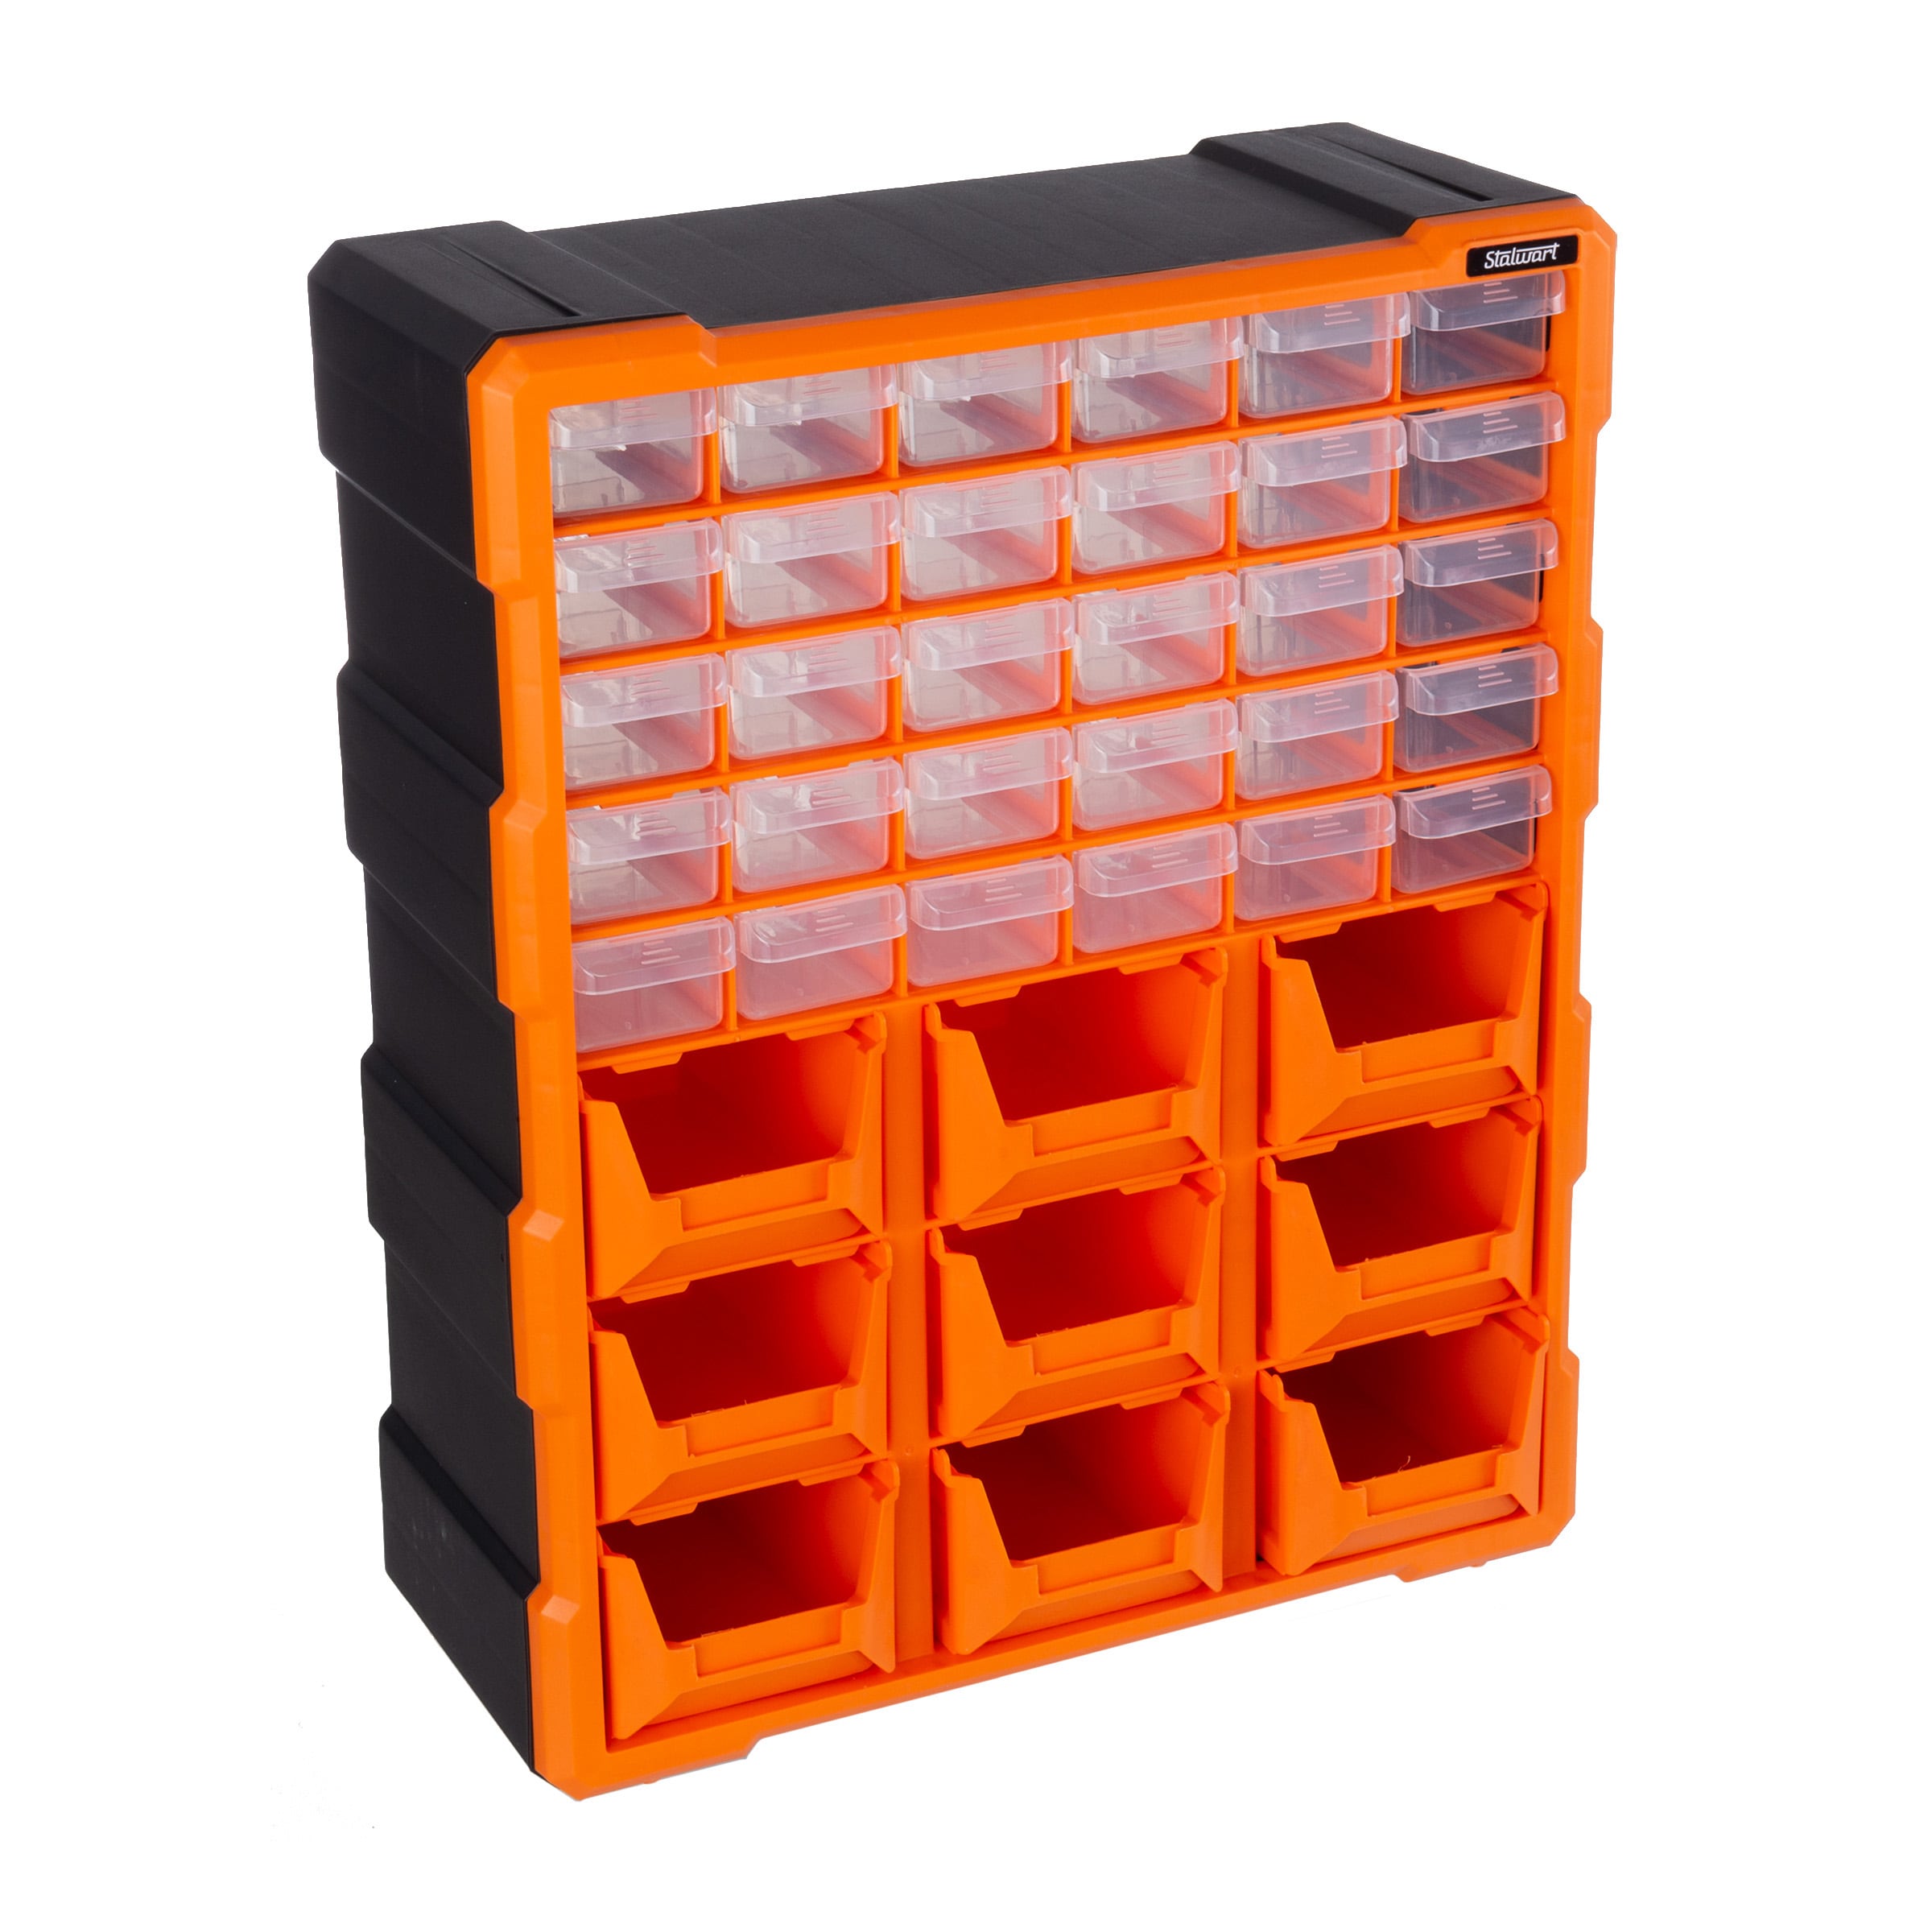 Stalwart Plastic Storage Tray with 39 Drawers - Small Parts Organizer for  Screws, Nuts, Bolts, Beads, and More - Multiple Colors/Finishes